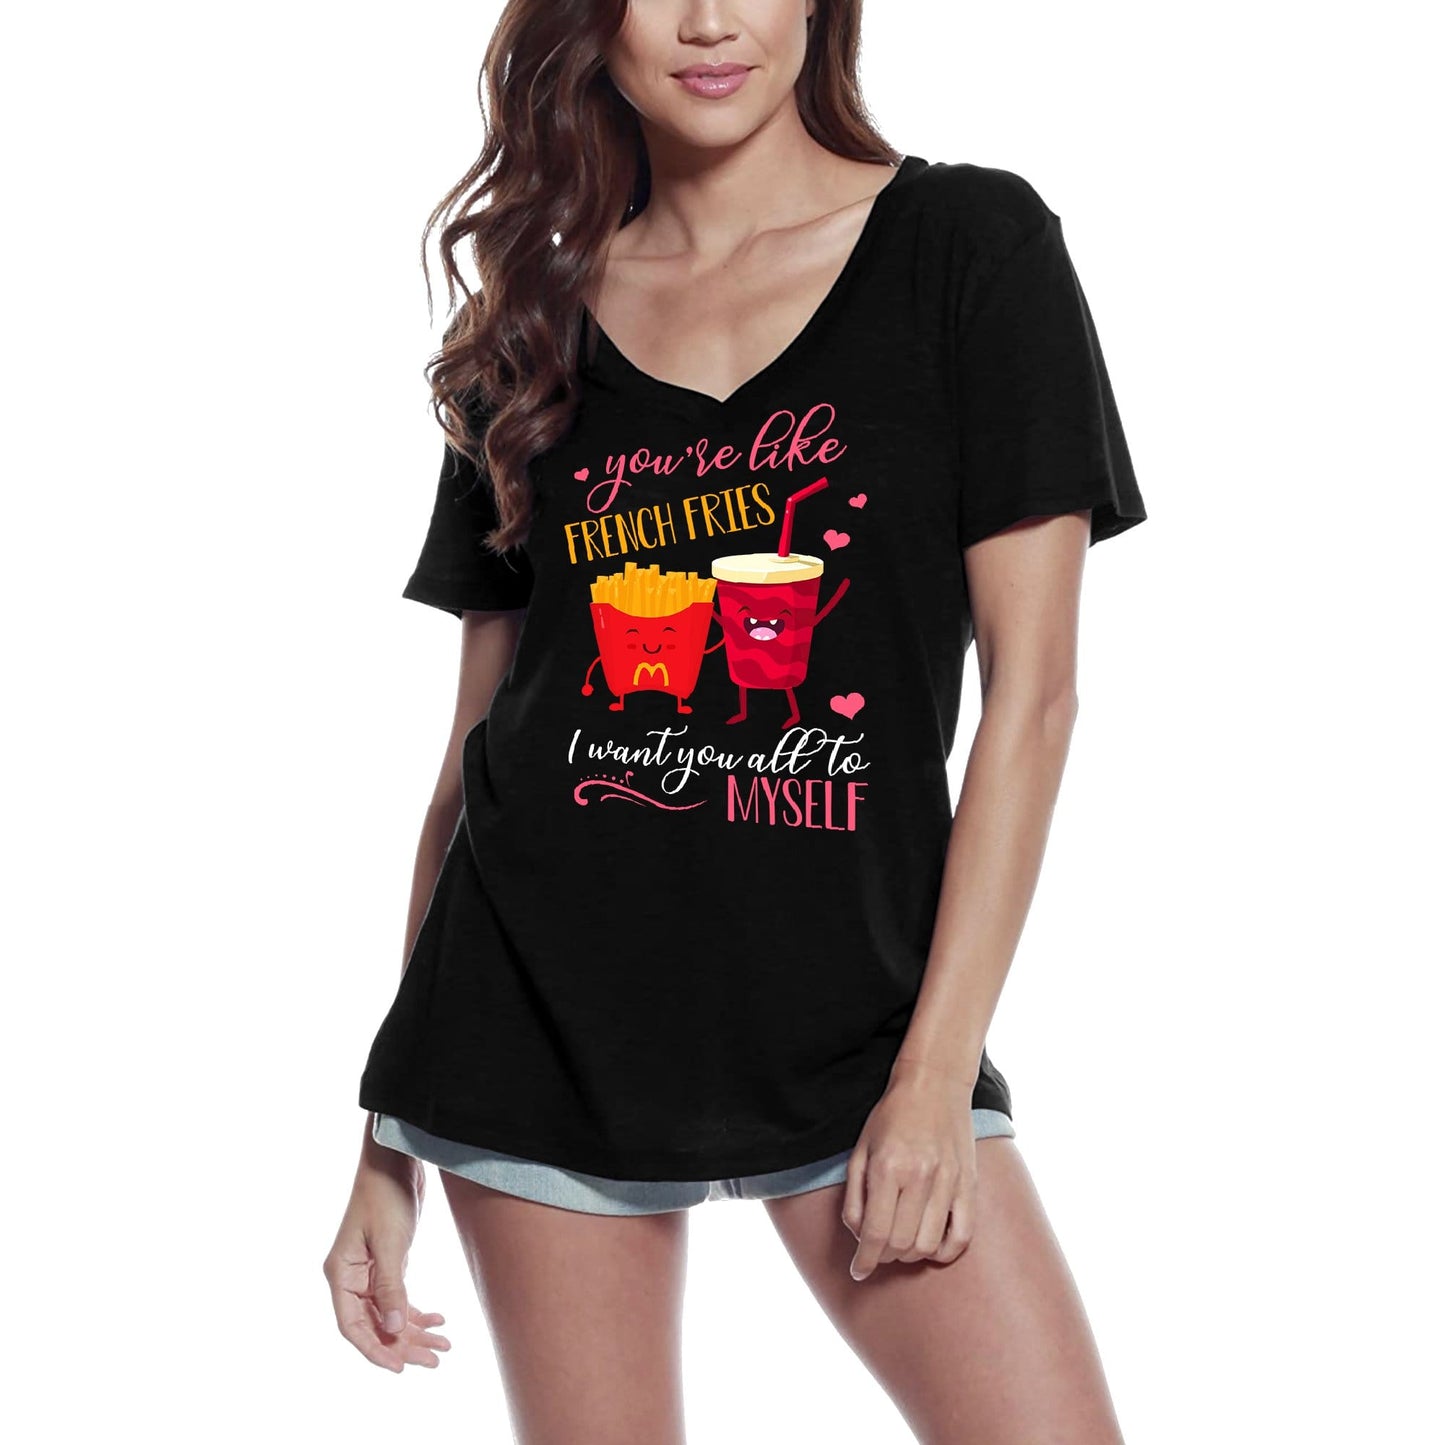 ULTRABASIC Women's T-Shirt You are Like French Fries - I Want You All to Myself - Funny Love Tee Shirt